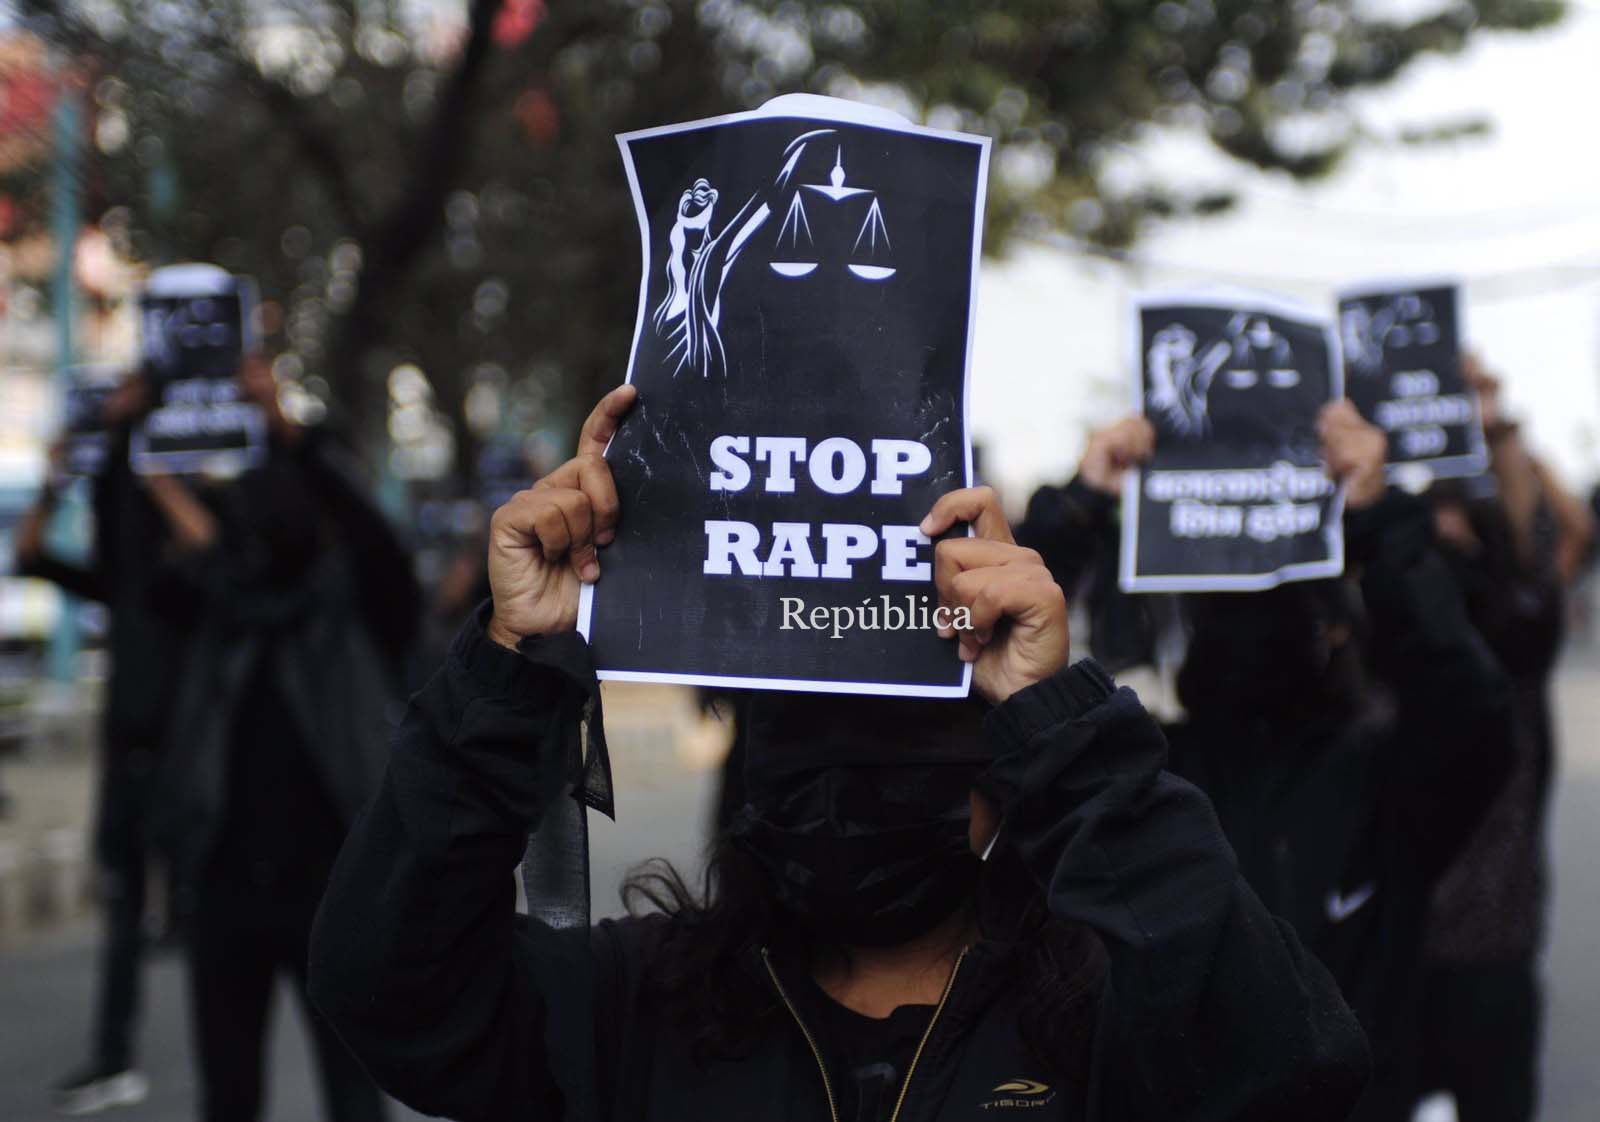 Rights activists seek withdrawal of time limit for rape complaints